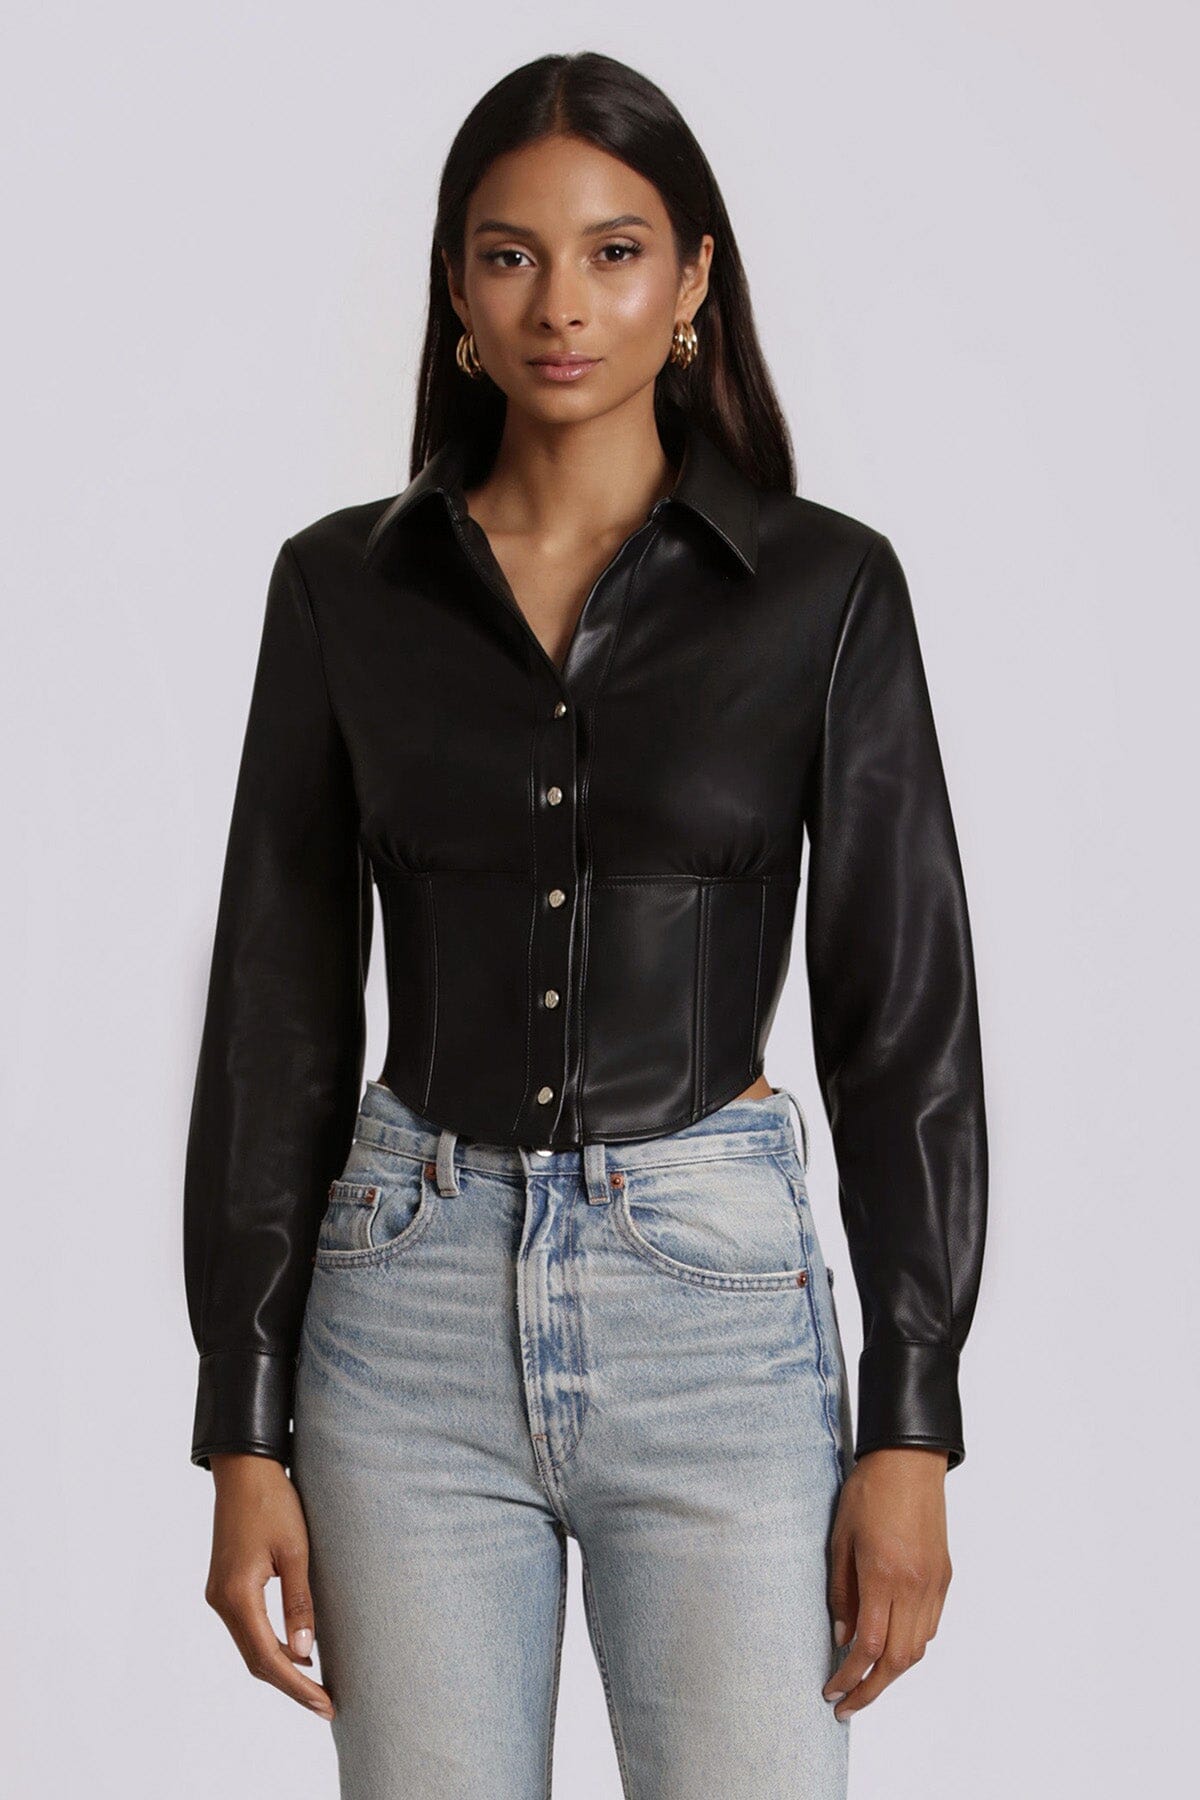 Black faux ever leather long sleeve corset shirt - figure flattering day to night tops shirts for ladies